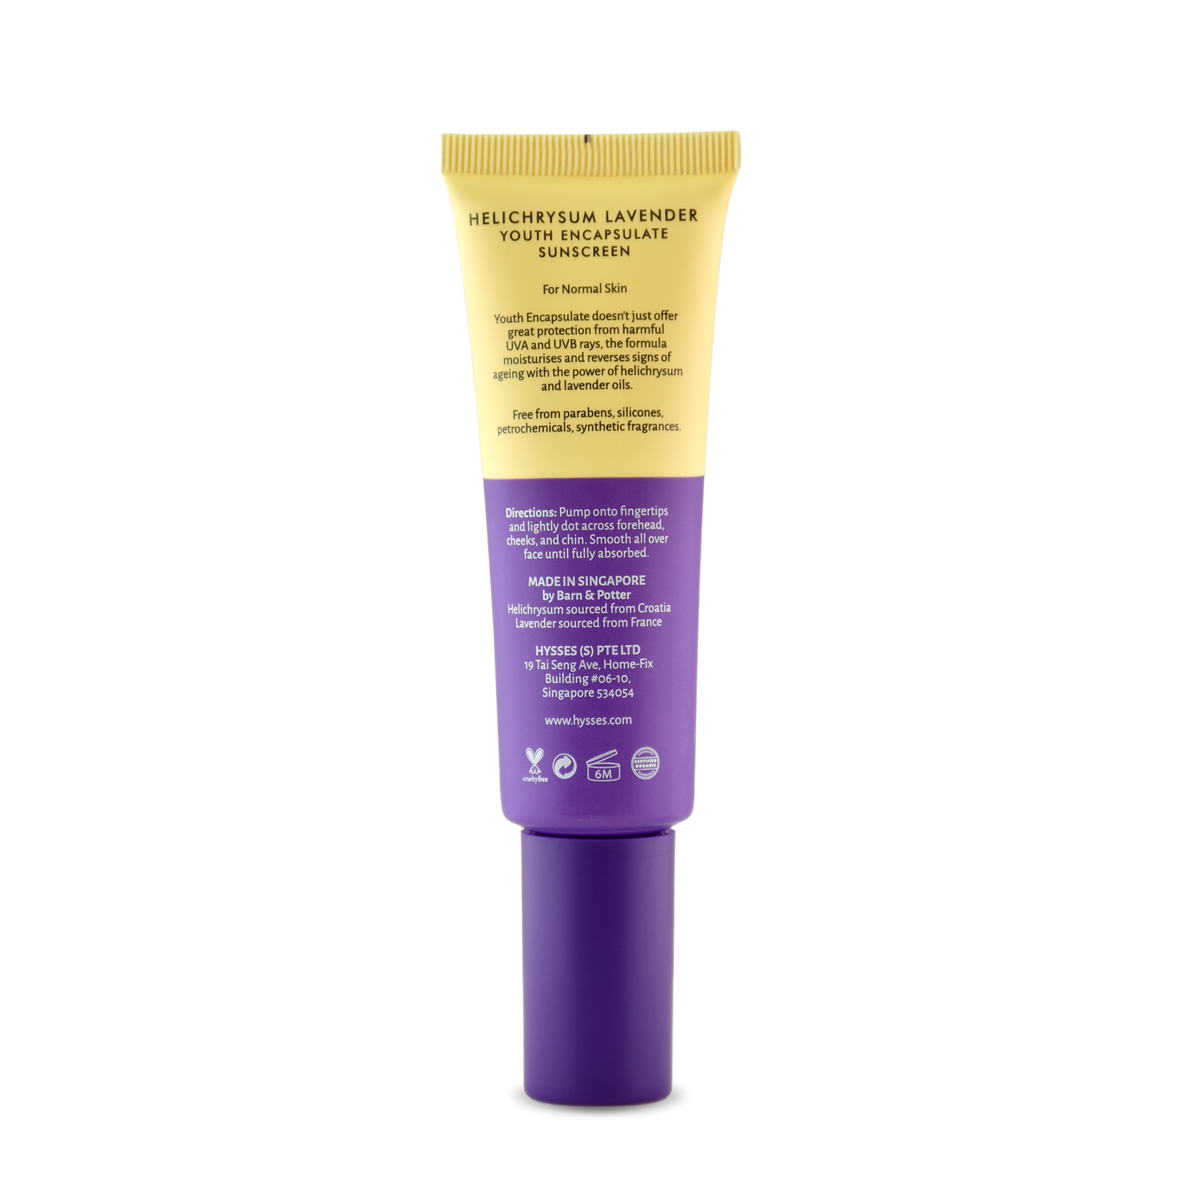 Youth Encapsulate Sunscreen Helichrysum Lavender SPF 40 / PA++